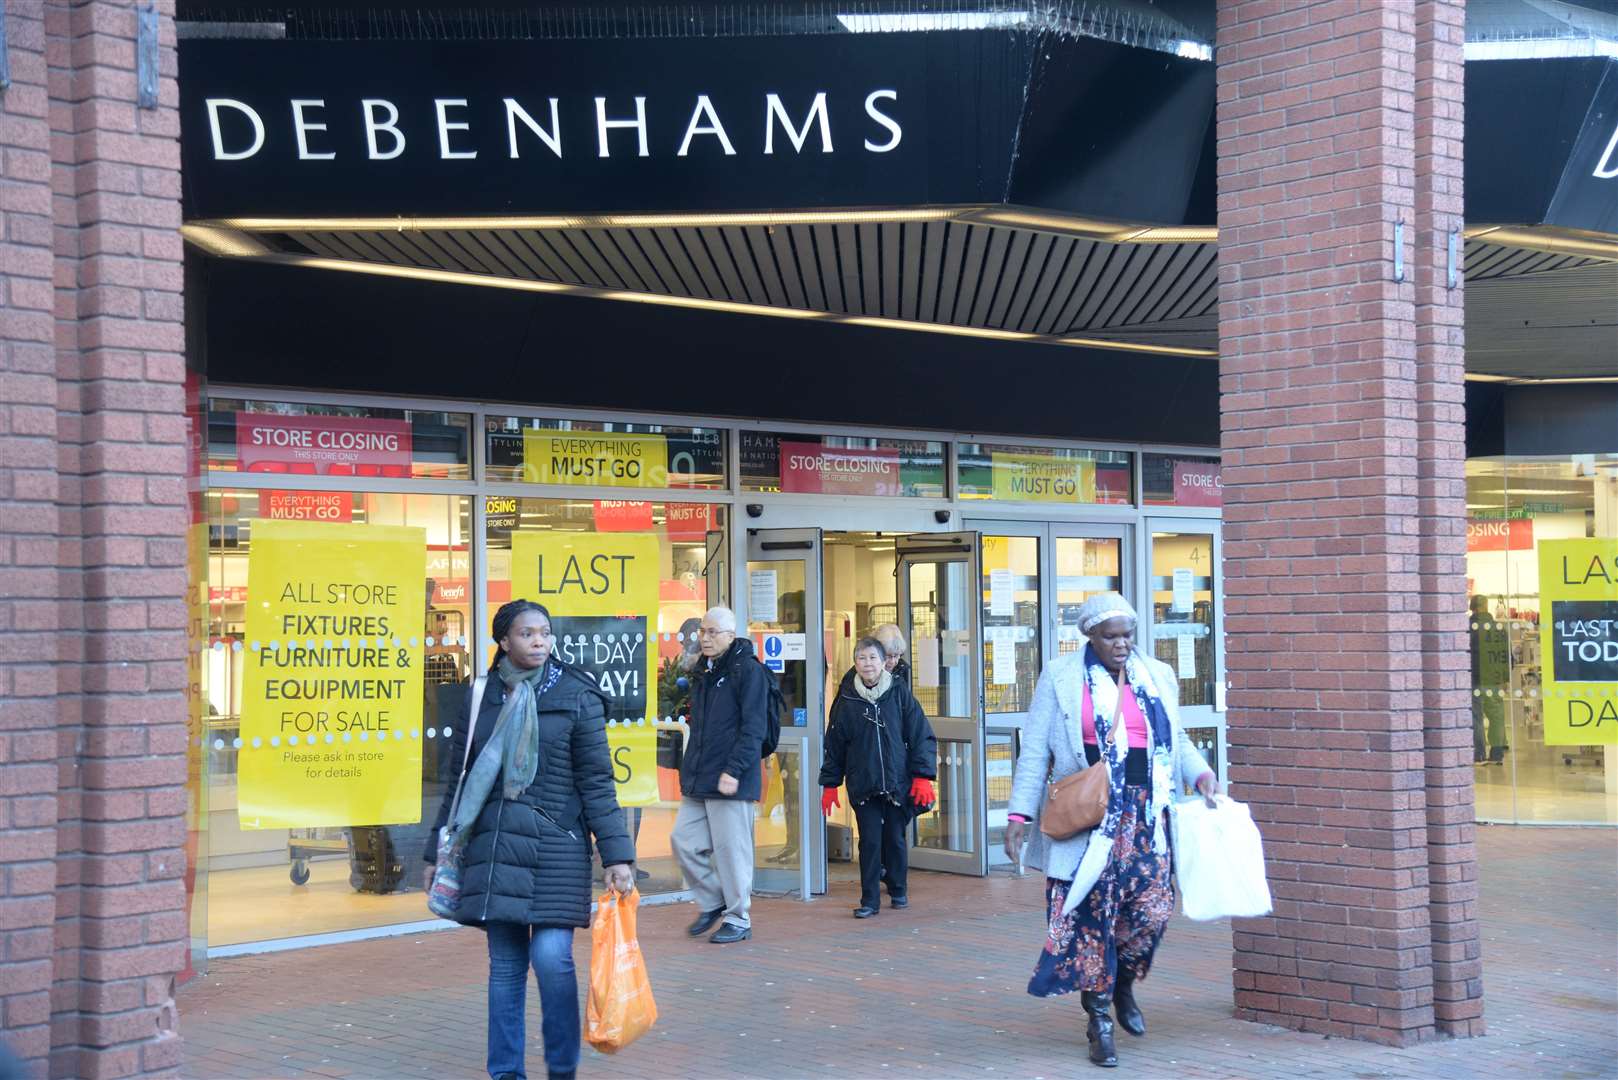 The plan sets out an aspiration to develop the now-empty Debenham's site in Chatham